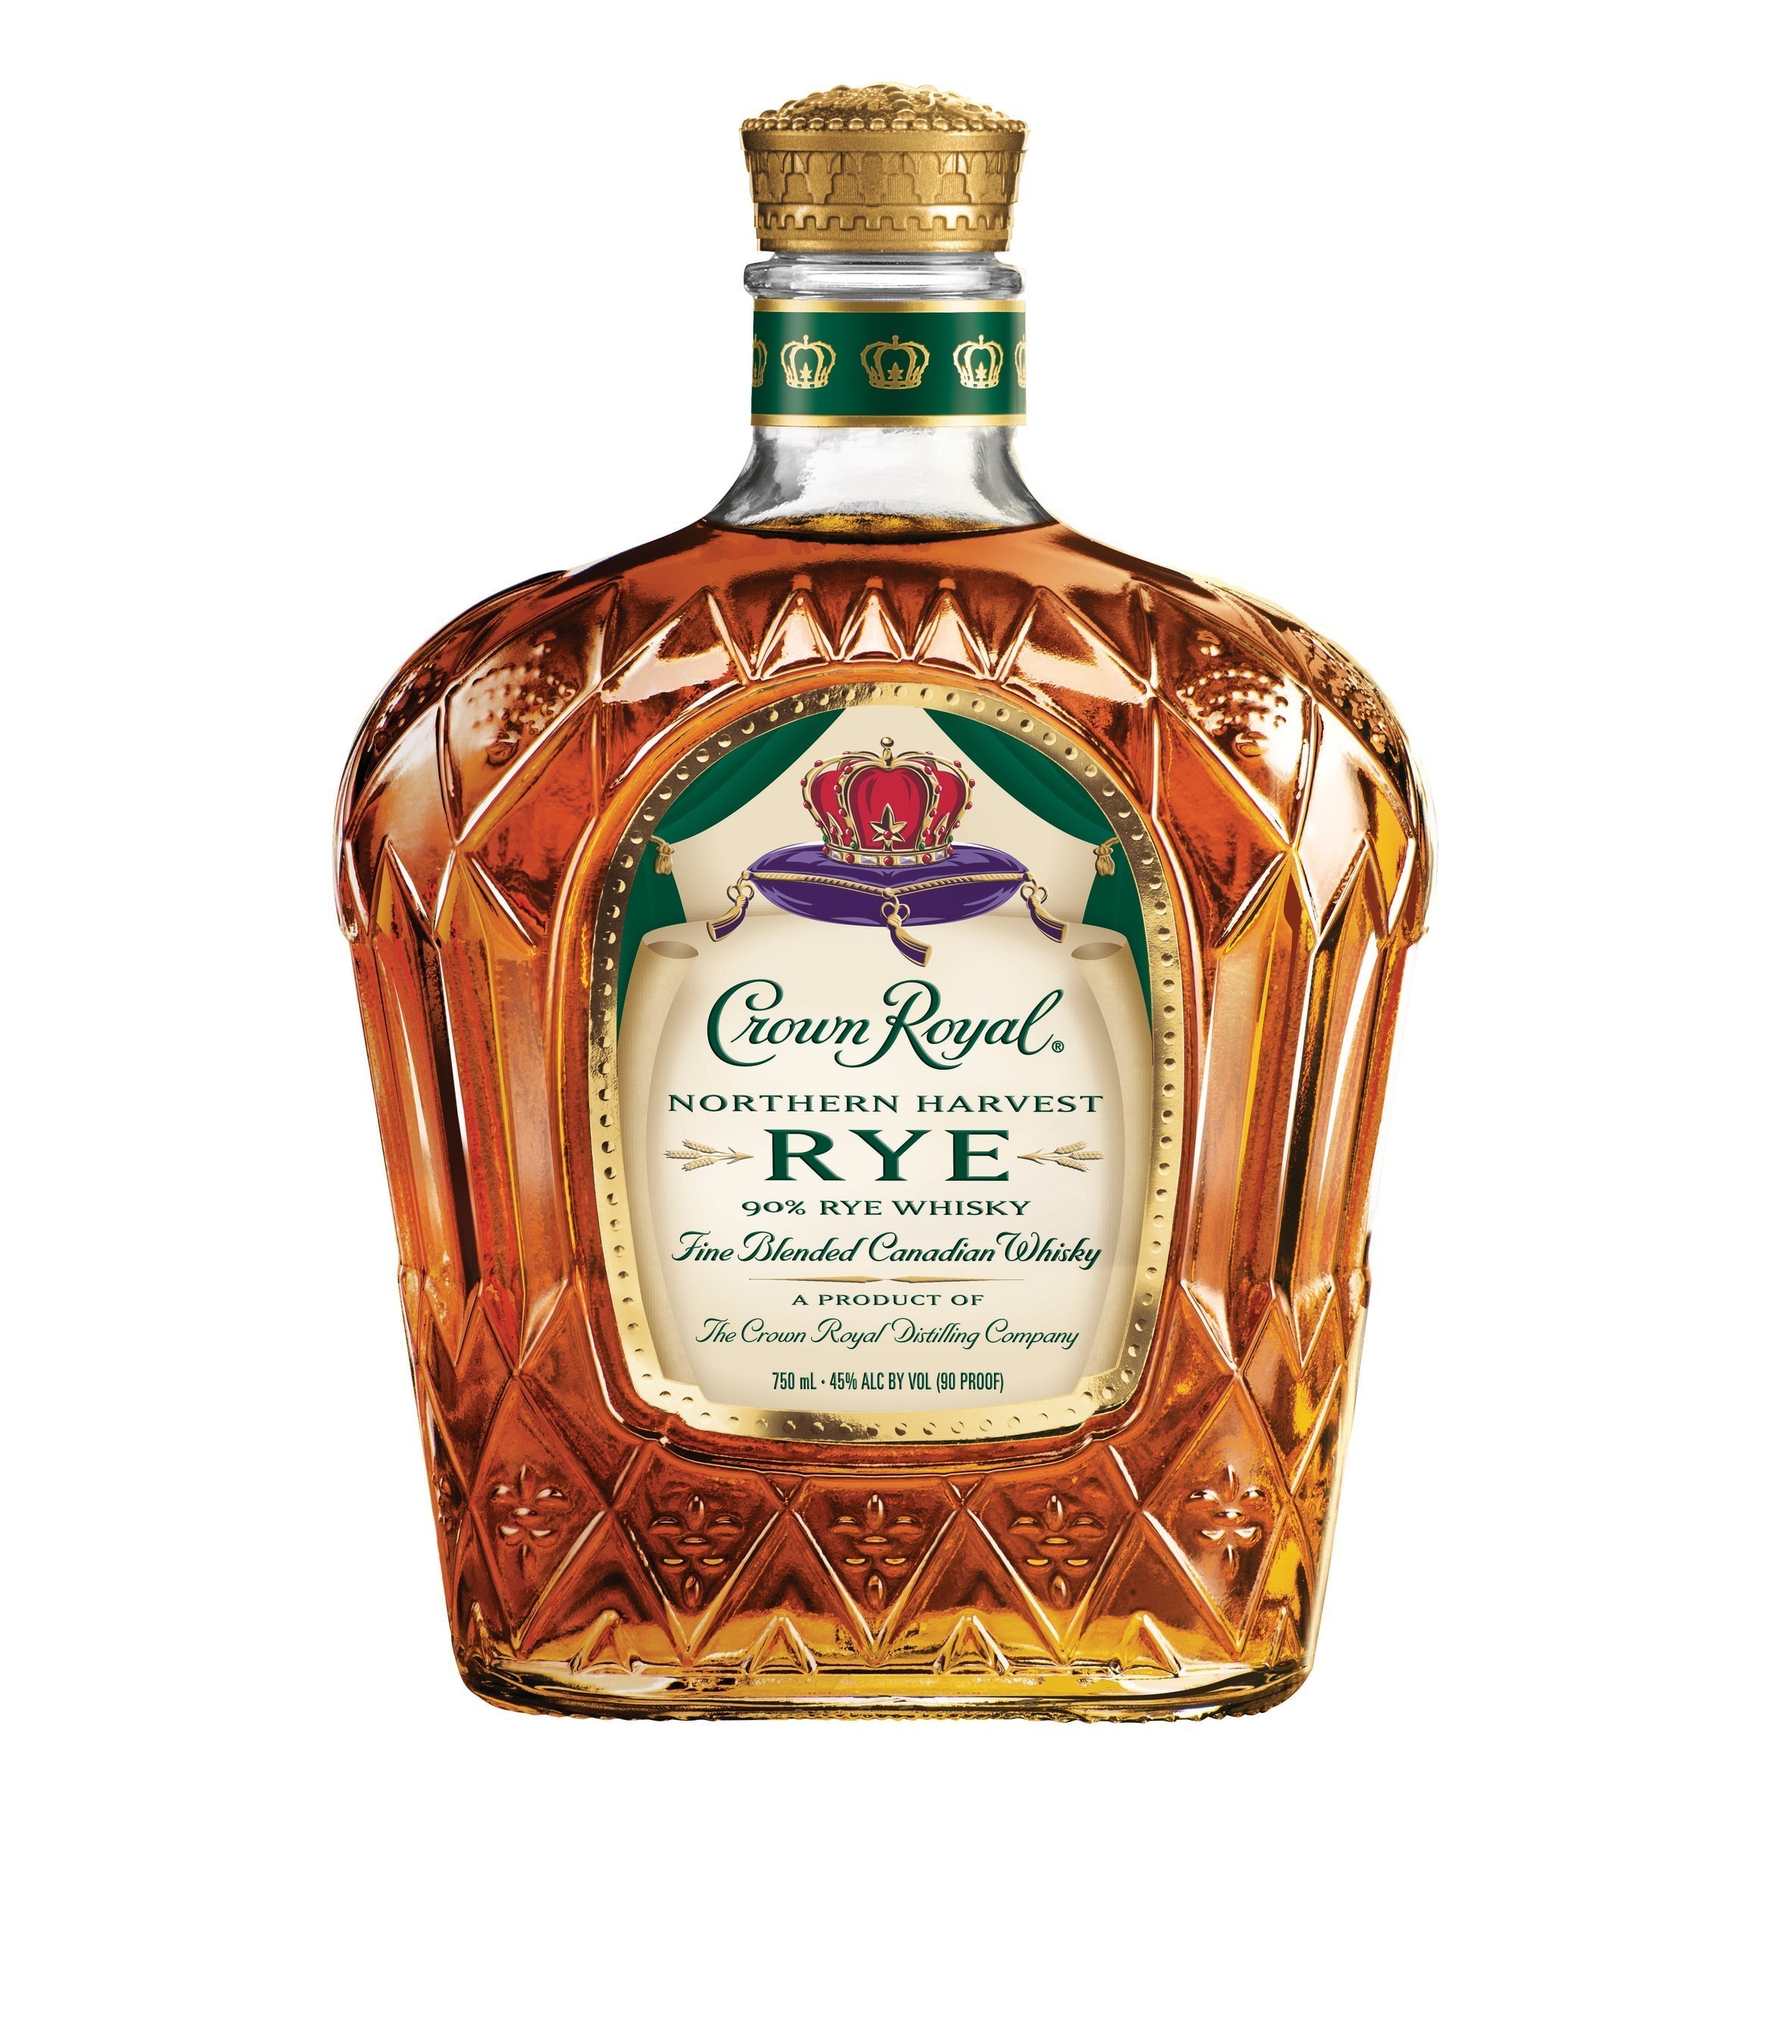 Crown Royal Northern Harvest Rye is the 2016 World Whisky of the Year.